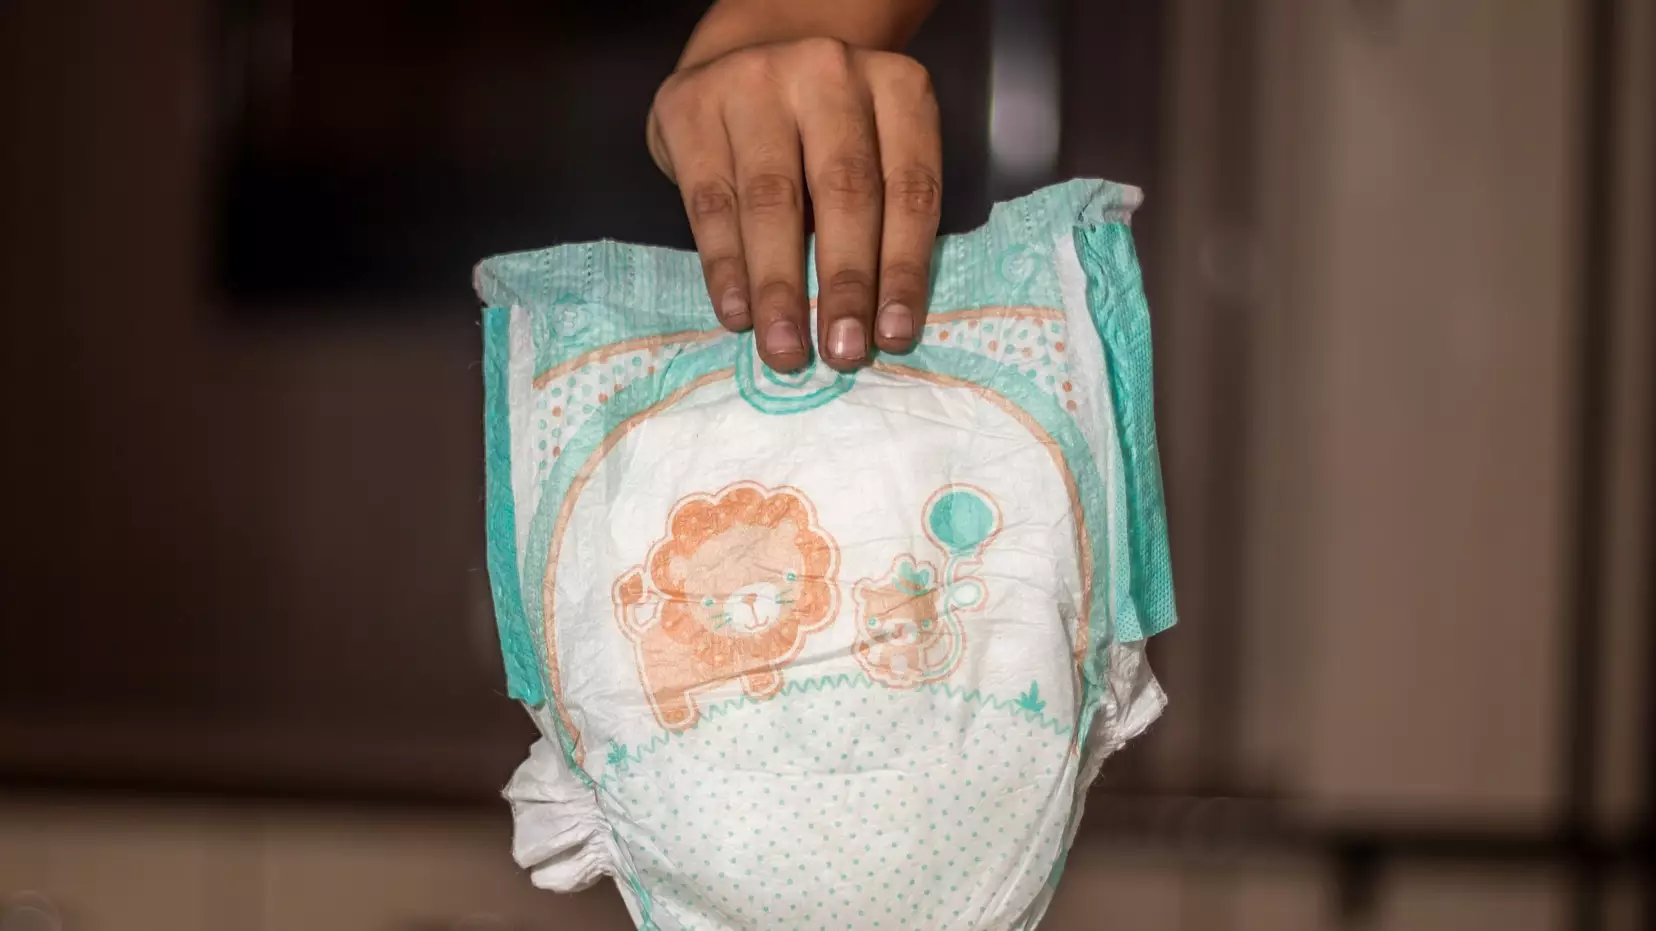 Australian Parents Should Ask For Consent Before Changing Nappies, Says Childcare Chain